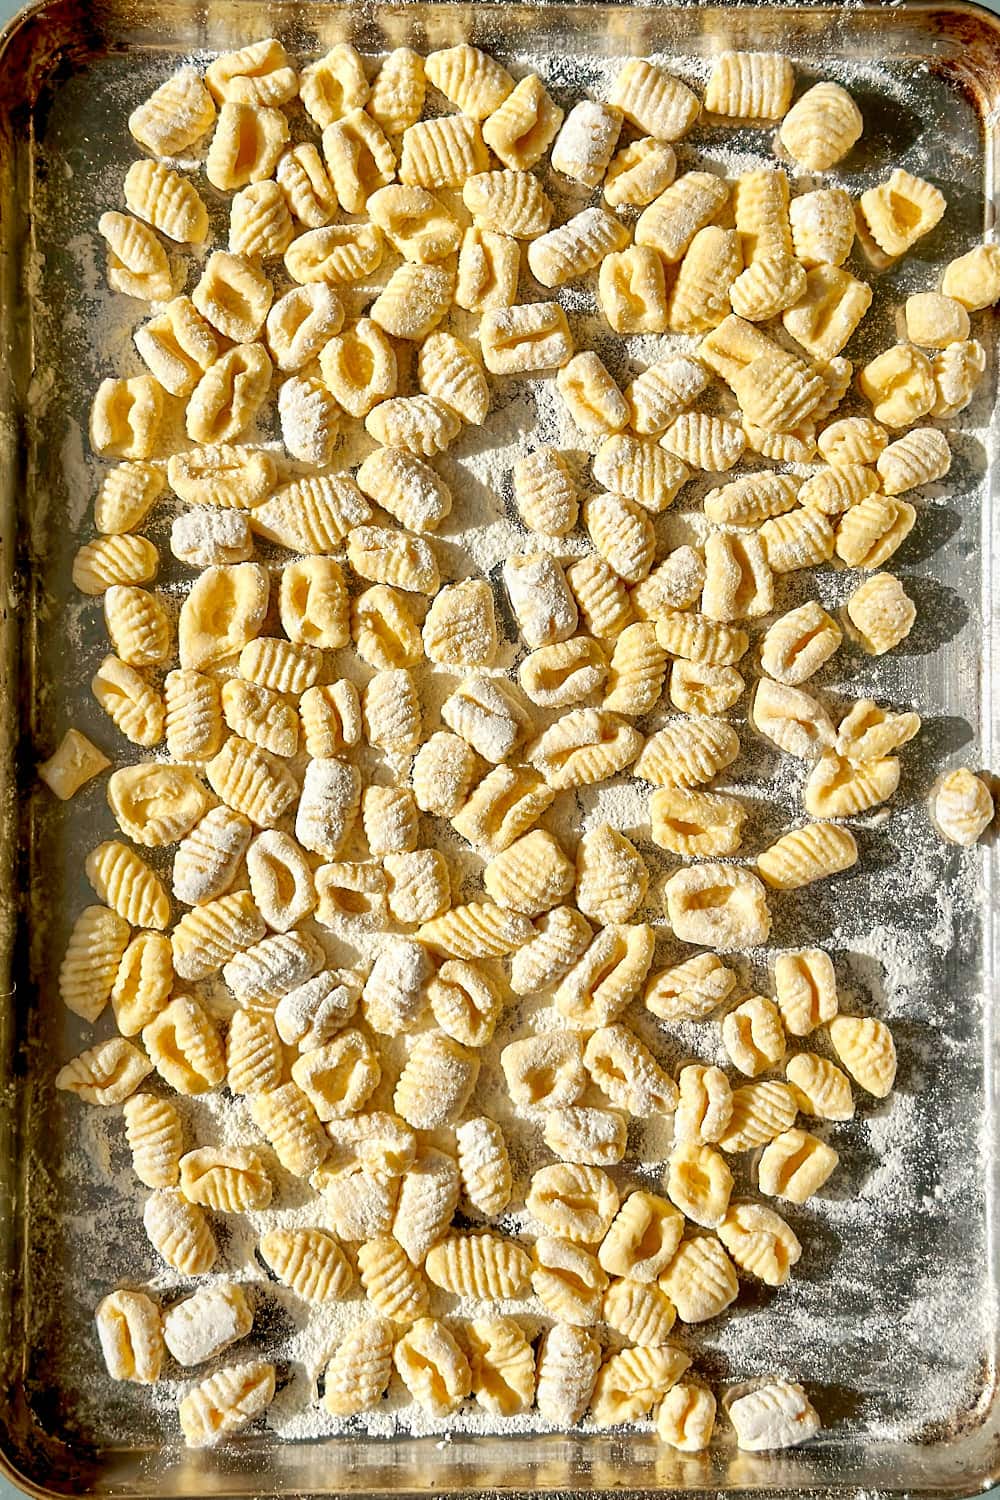 Homemade gnocchi on a baking tray.